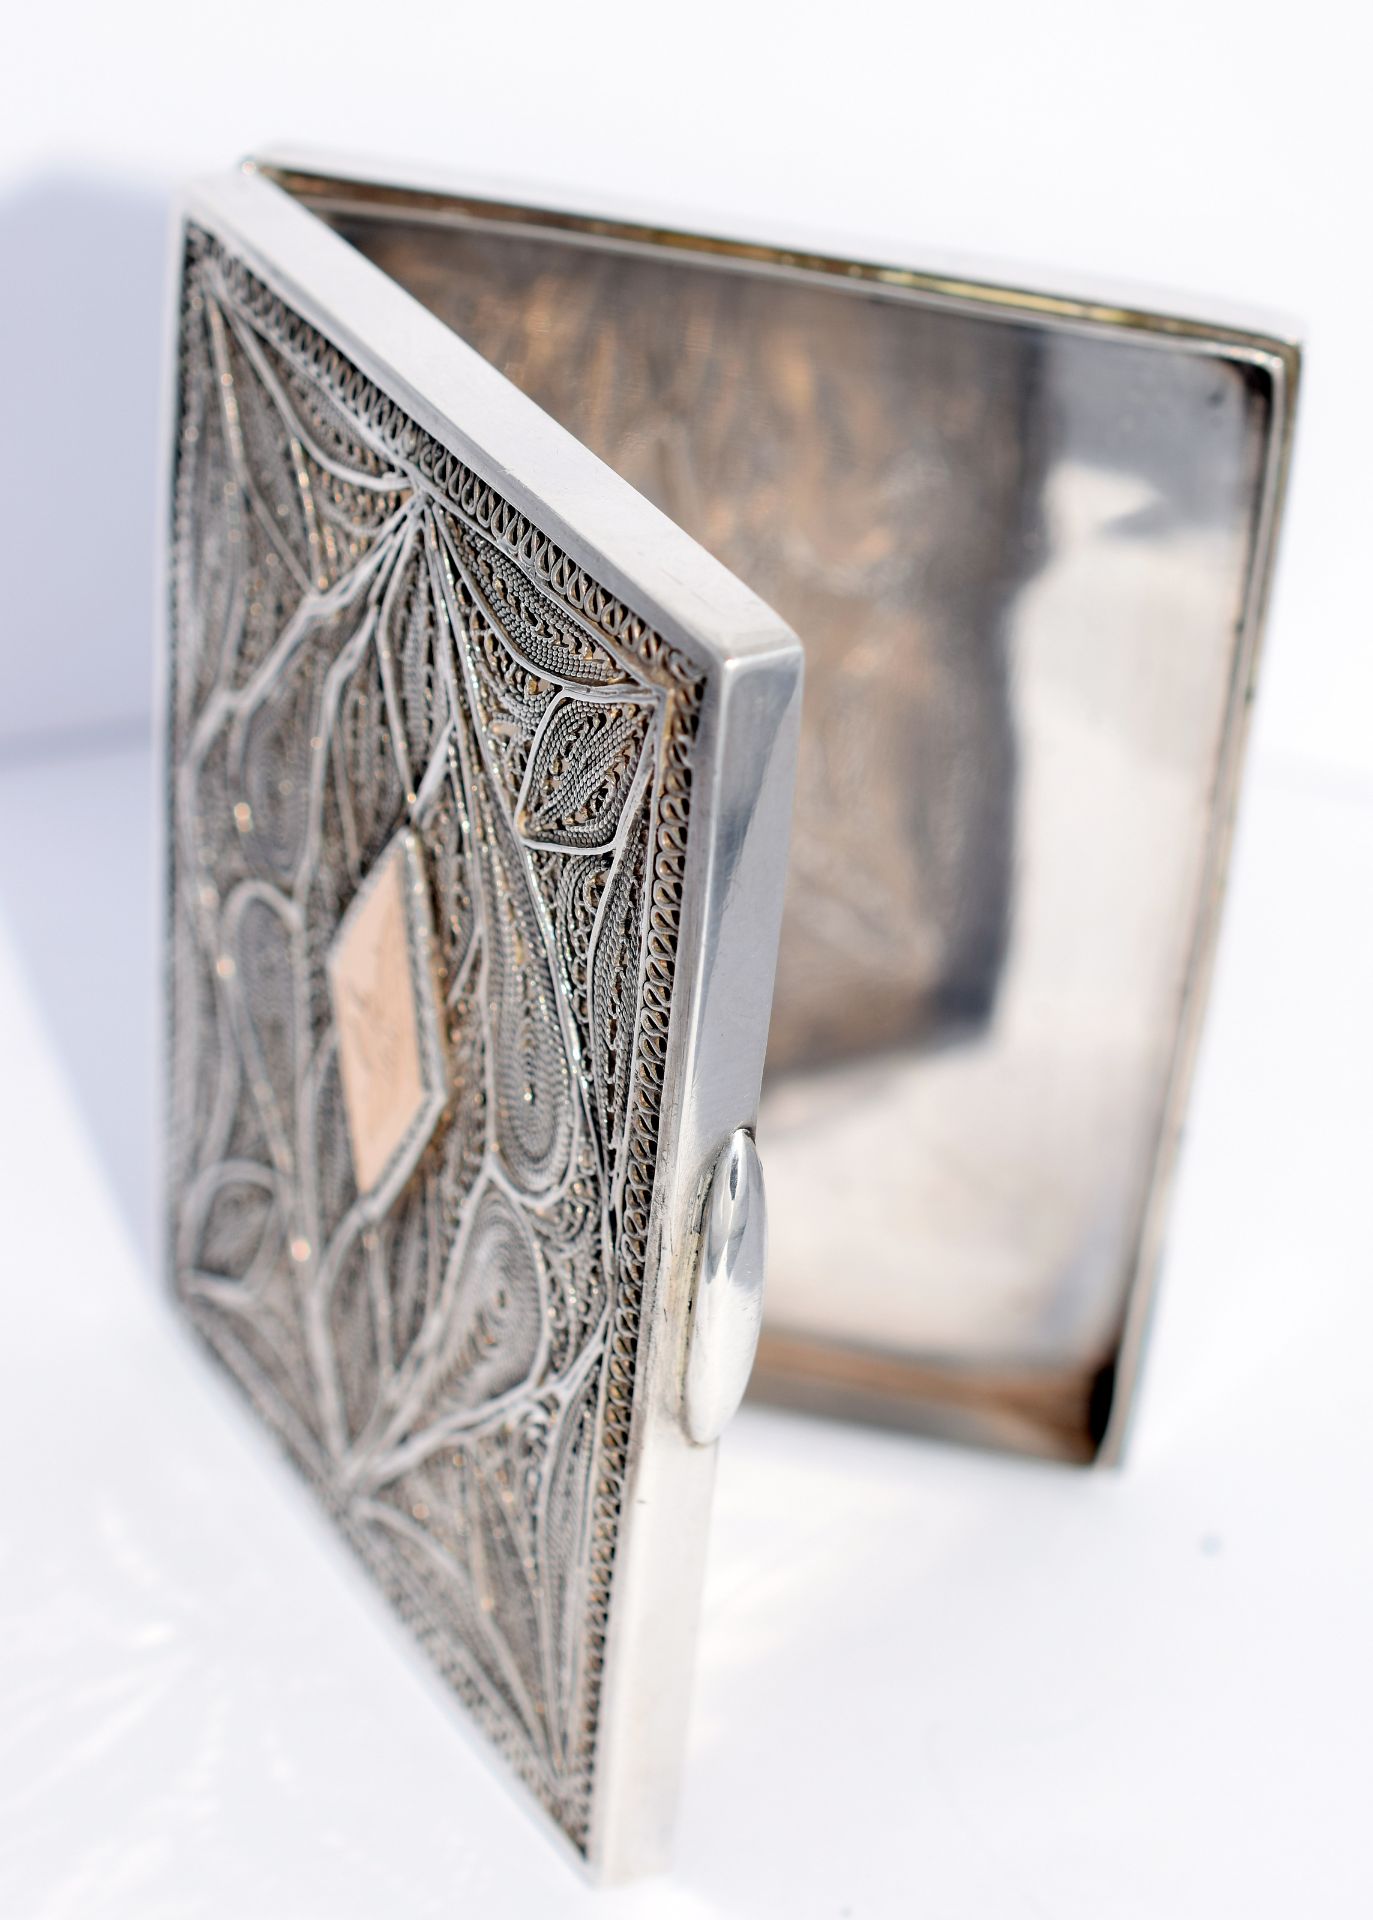 Solid Silver Gentleman's Business Card Holder With Gold Feature c1930s - Image 7 of 8